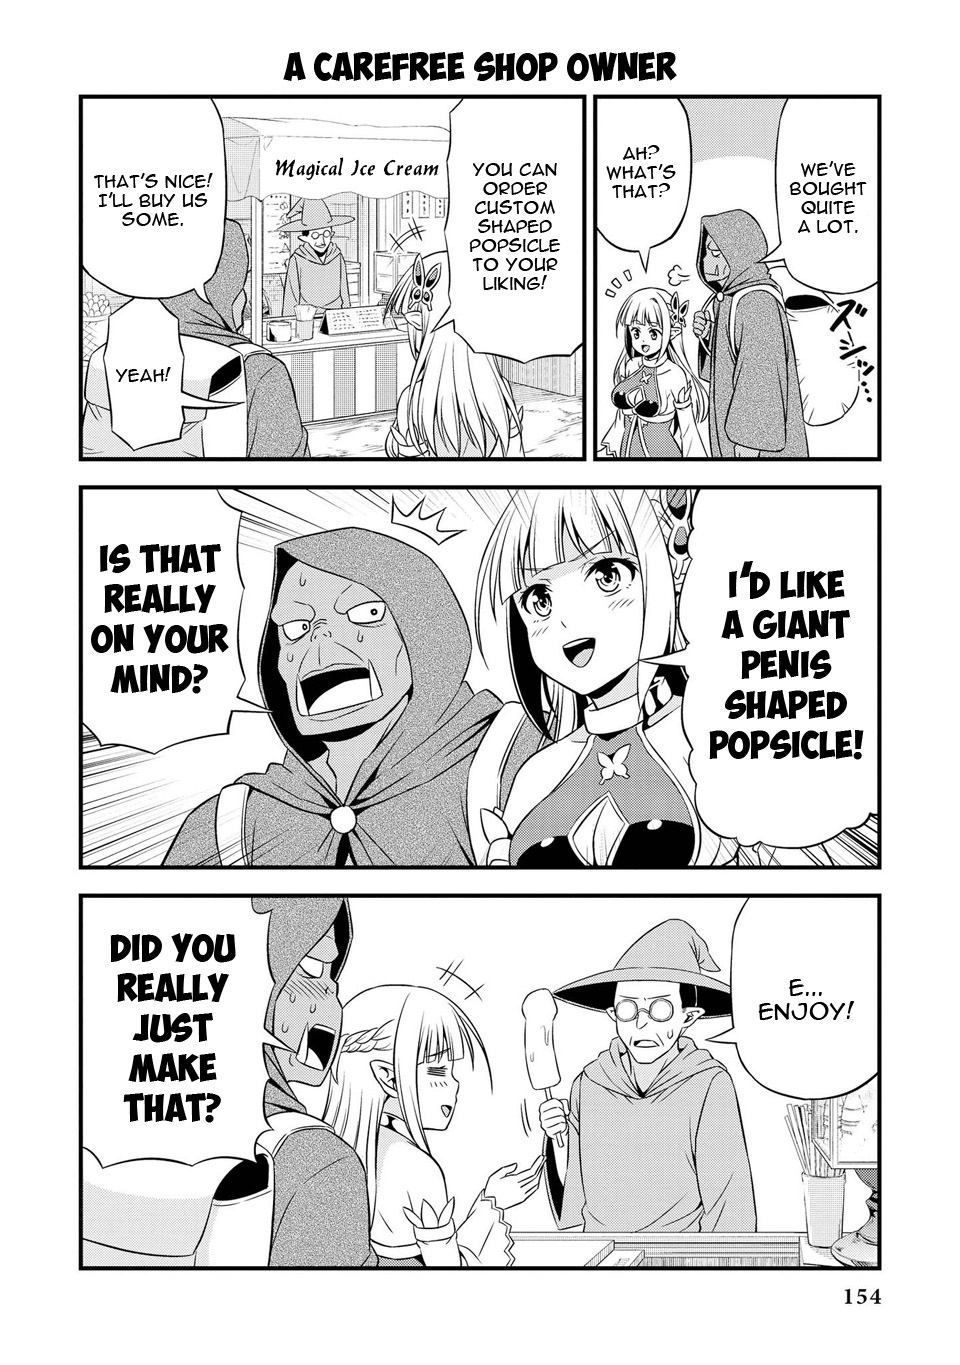 Hentai Elf to Majime Orc Vol. 5 Ch. 11 The first Invitation [End]